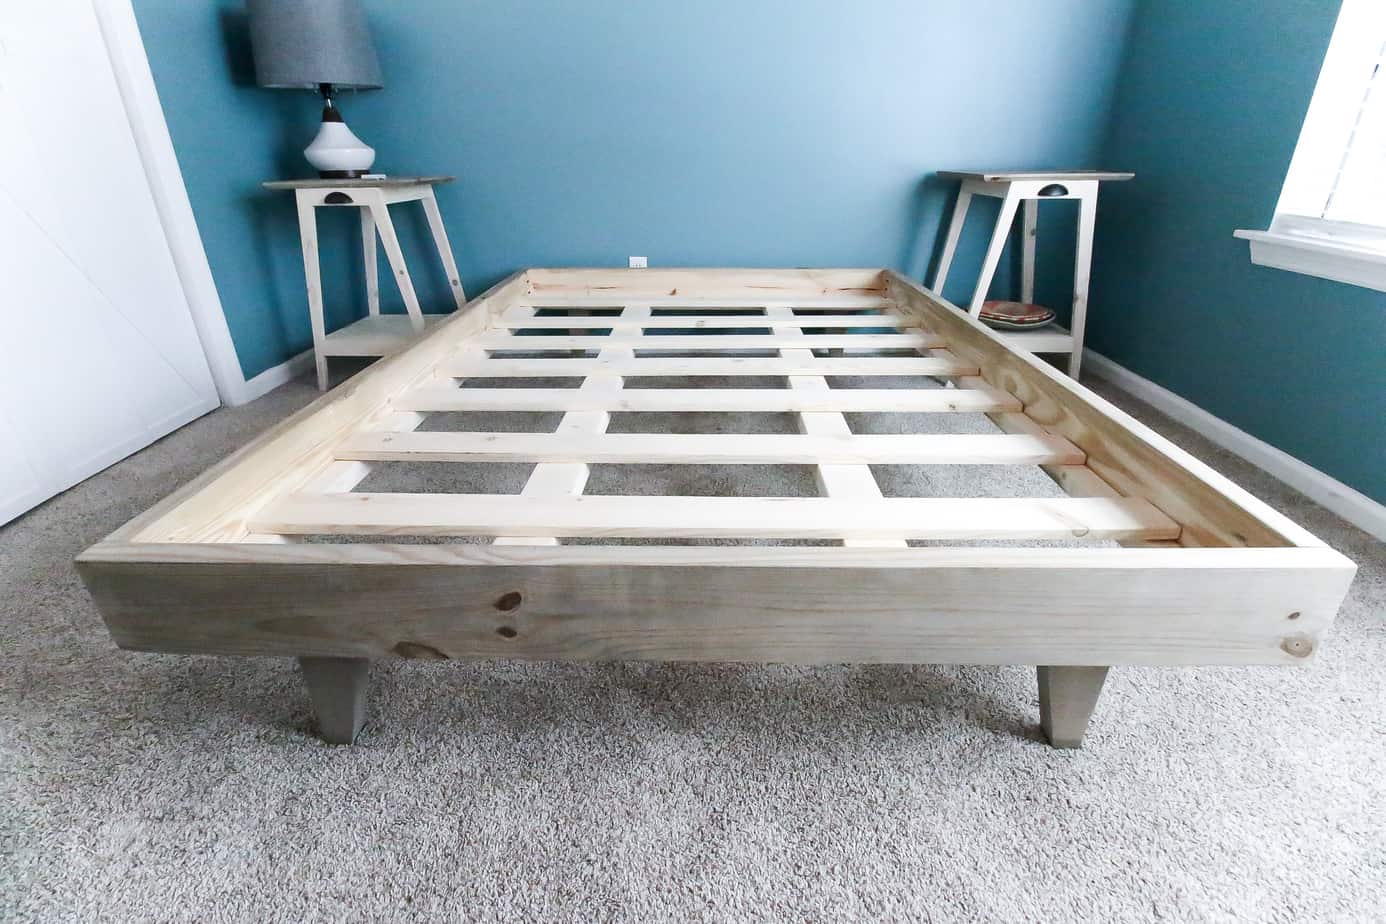 How To Build A Platform Bed For 50, Easy To Build Bed Frame Plans Queen